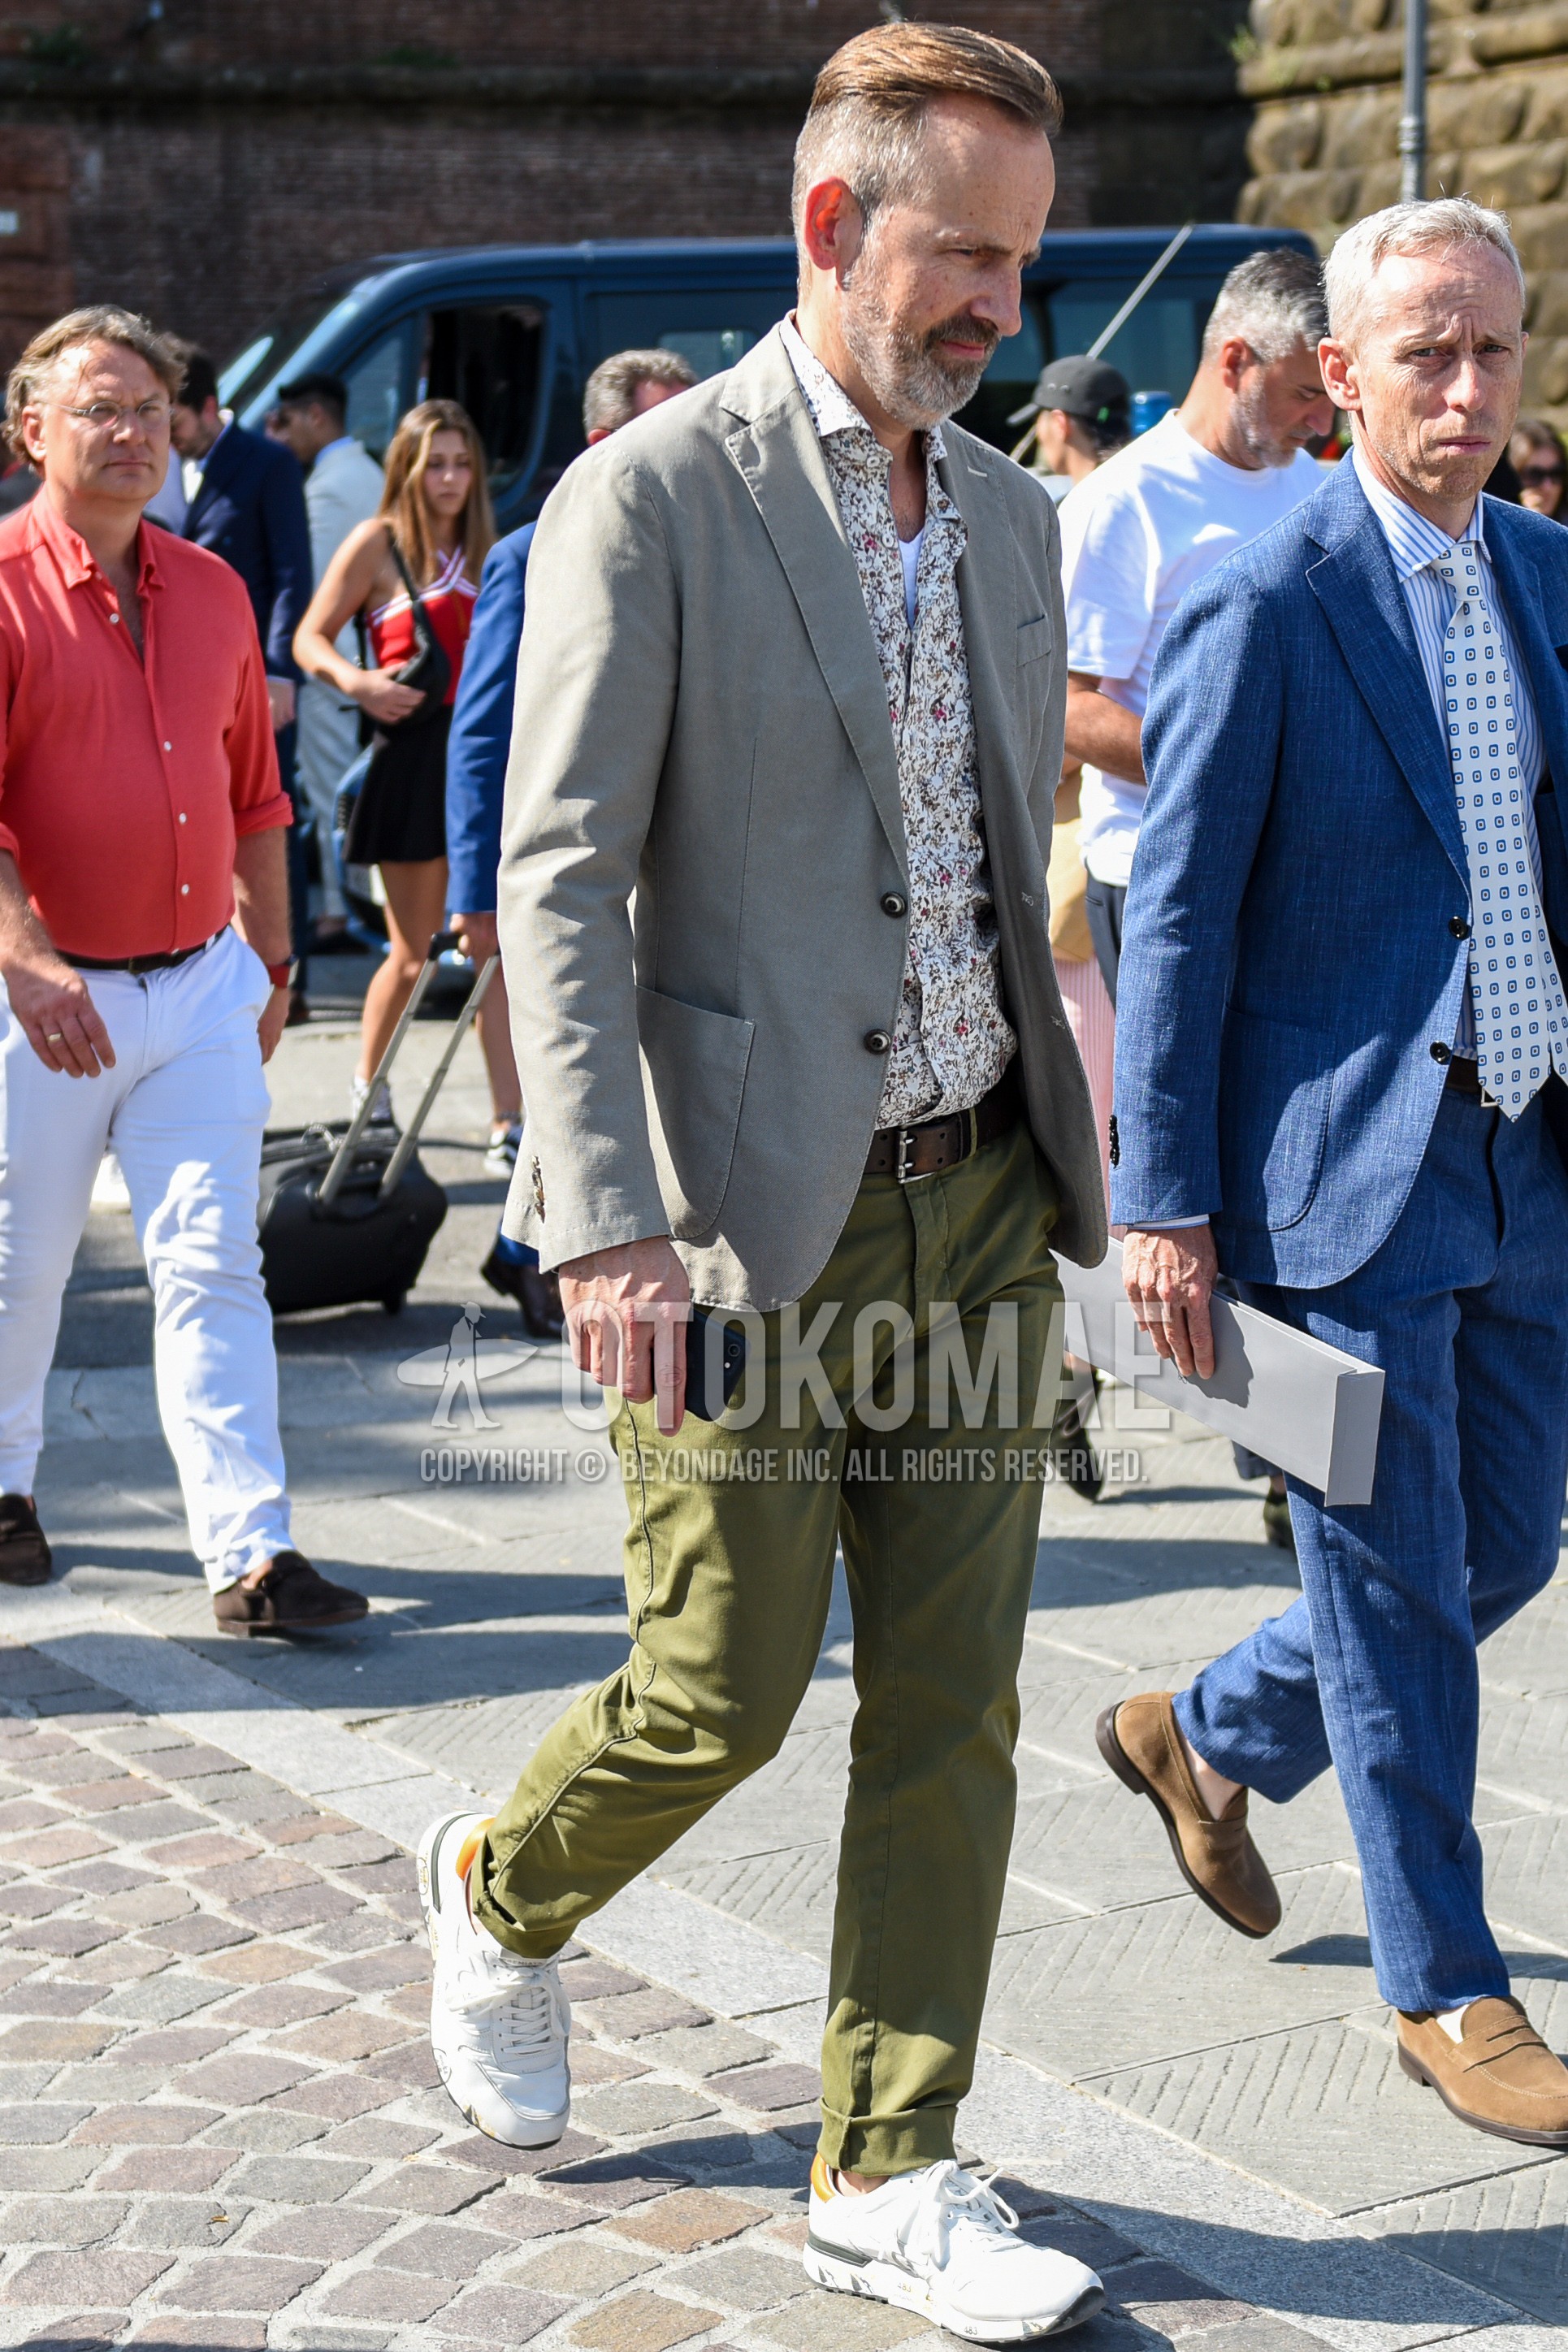 Men's spring summer autumn outfit with gray plain tailored jacket, white tops/innerwear shirt, brown plain leather belt, olive green plain chinos, white low-cut sneakers.